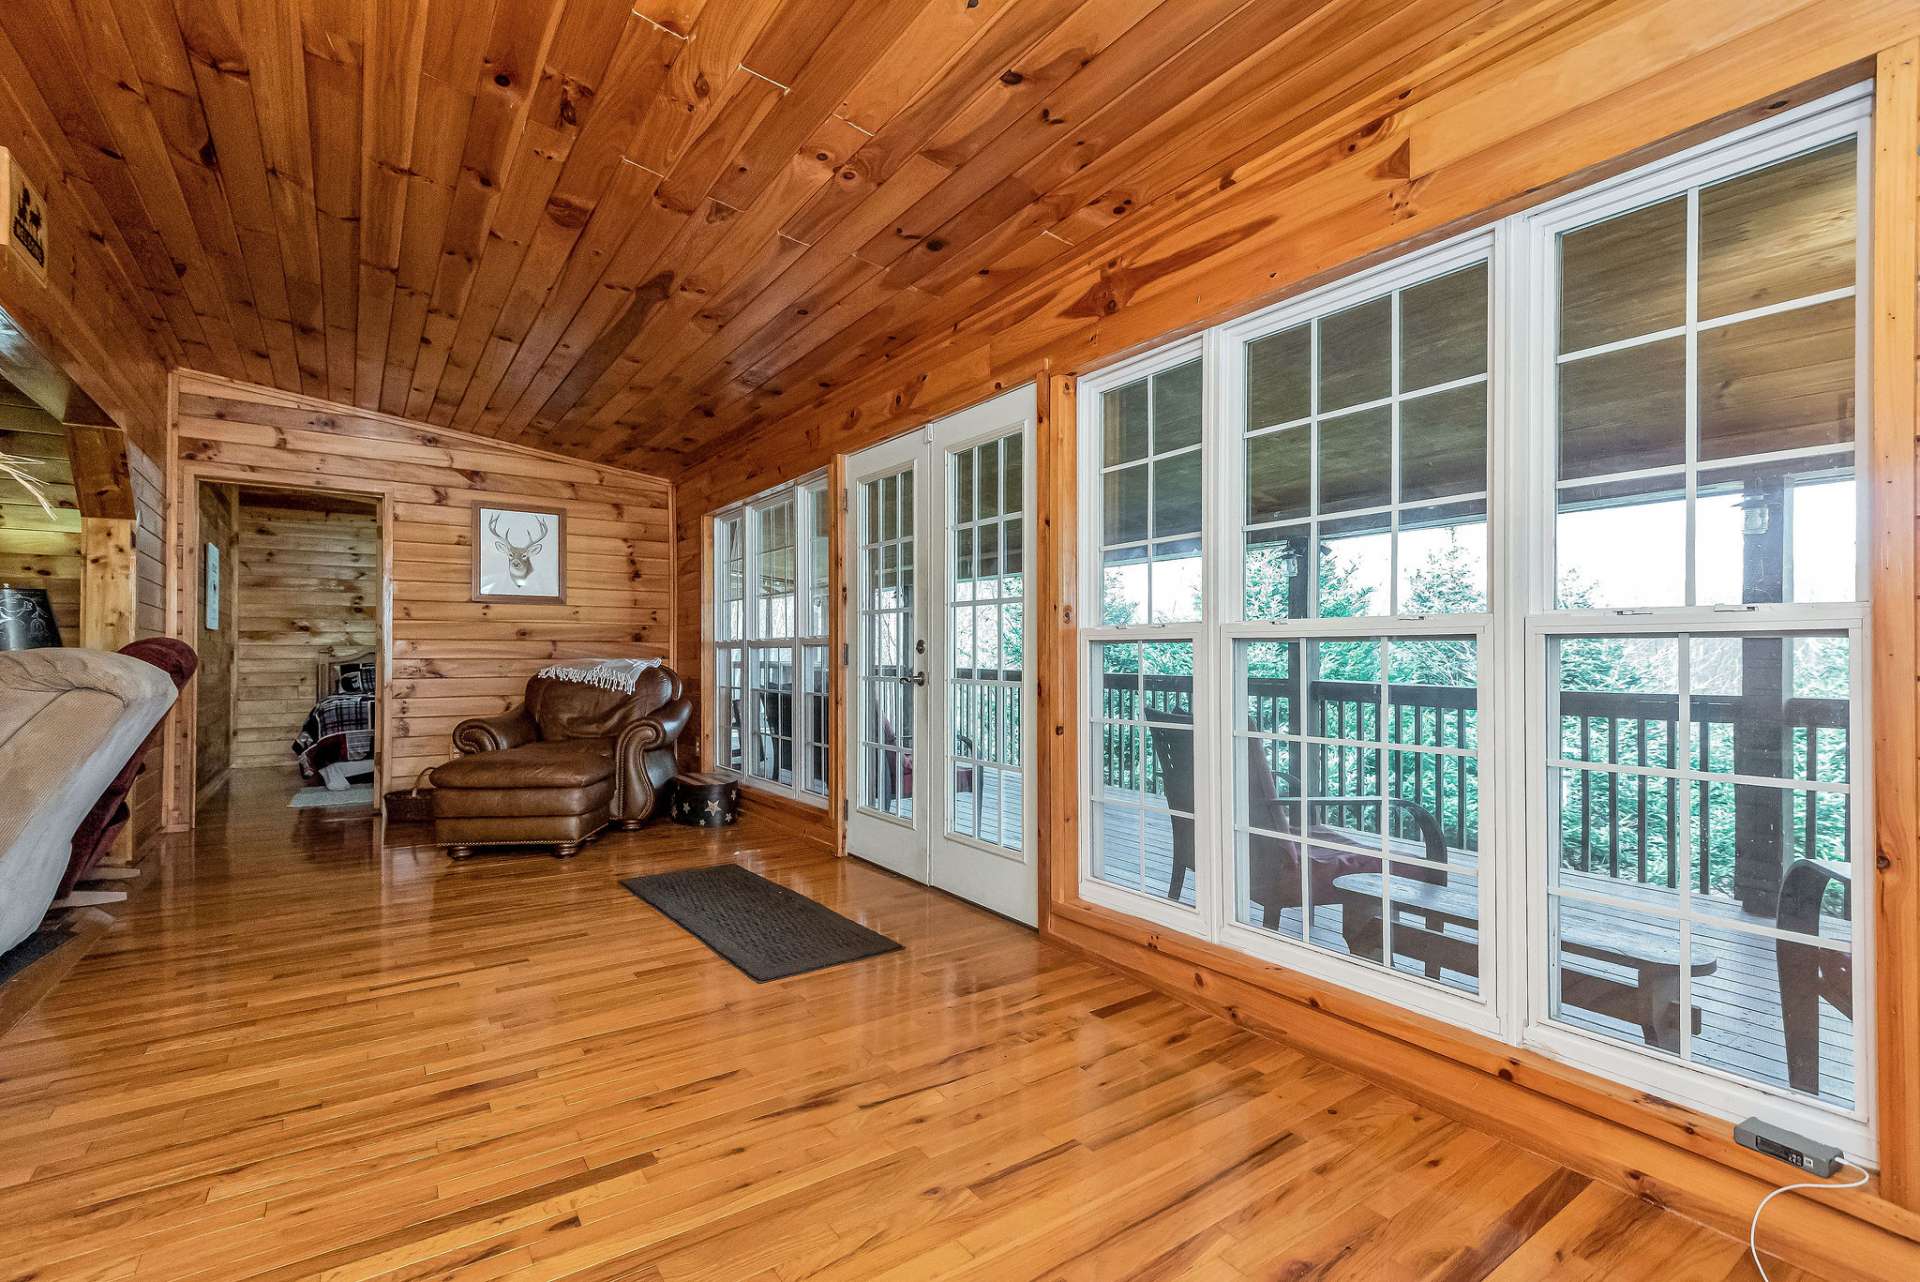 The sunroom brings in the outdoors and natural light.